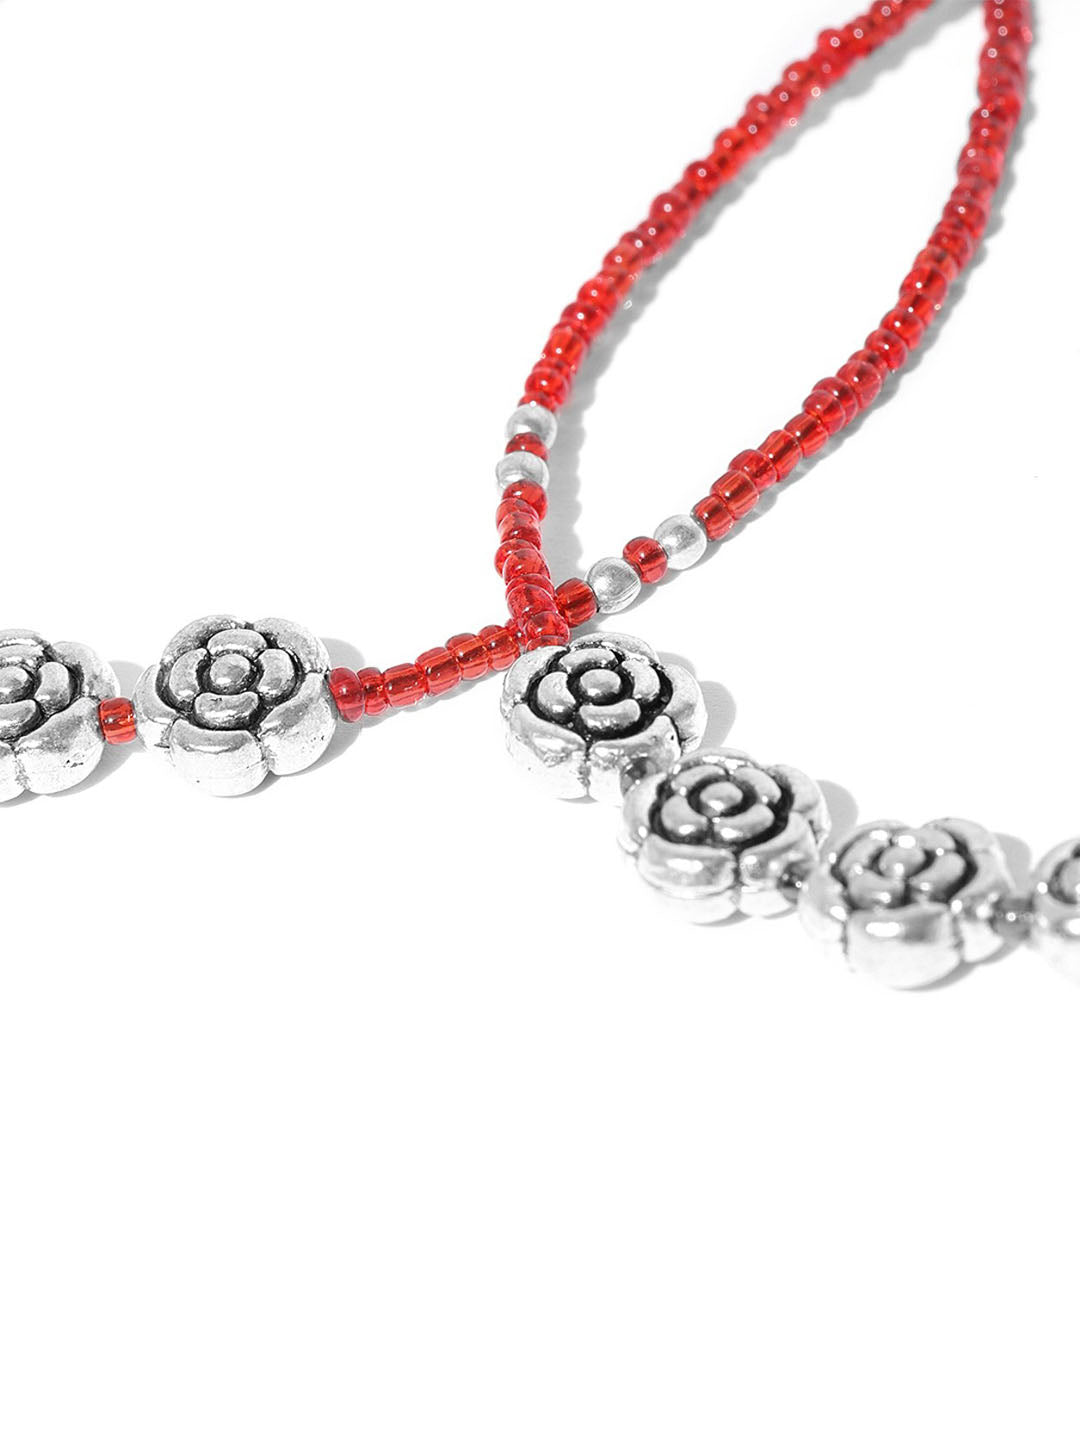 Oxidised Silver-Toned & Red Beaded Anklets For Women And Girls